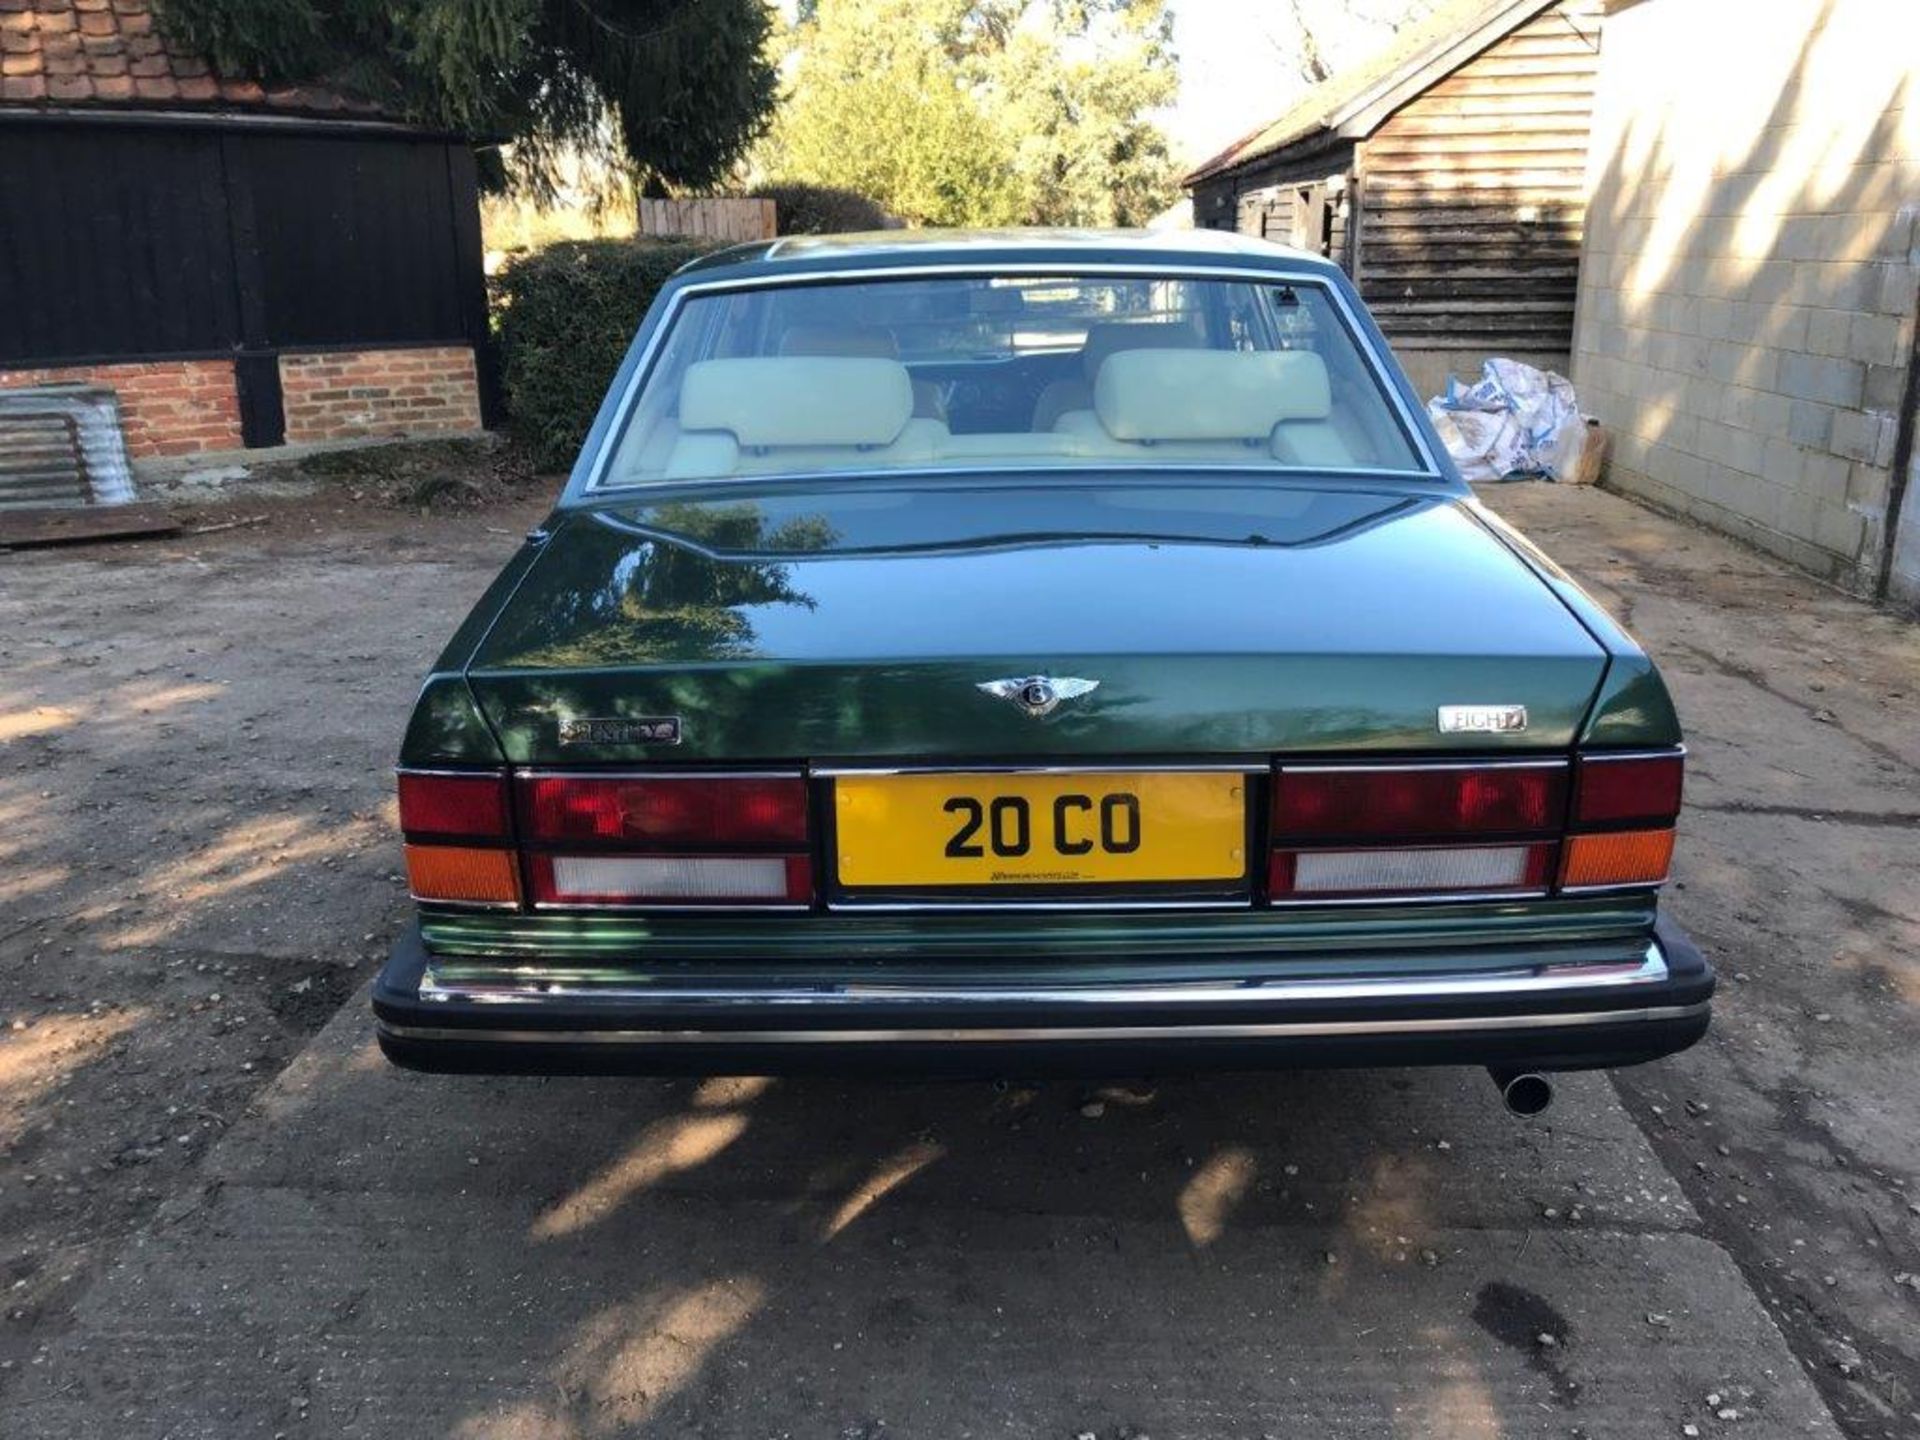 1989 BENTLEY 56k MILES - PRIVATE PLATE "20 CO" 2 PREVIOUS OWNERS FROM NEW - NEW MOT TO MARCH 2019 - Image 5 of 30